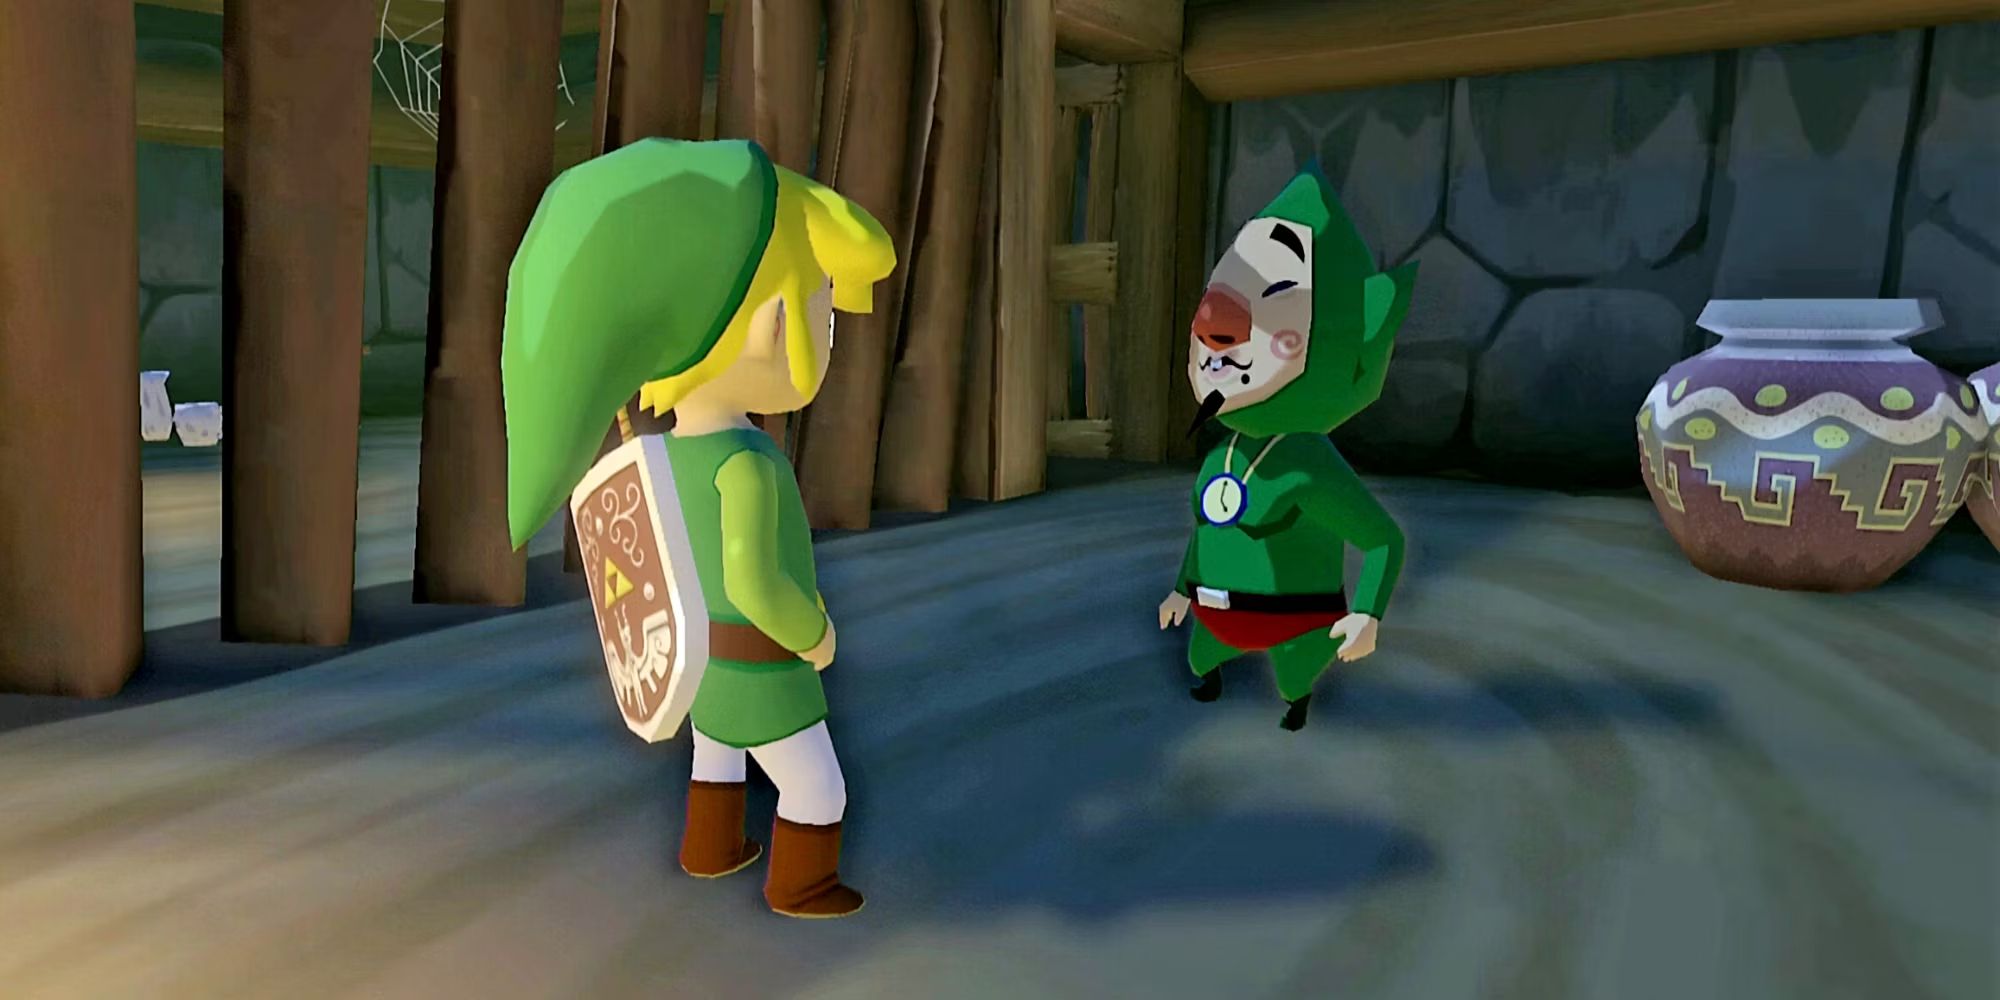 Link and Tingle in a jail cell